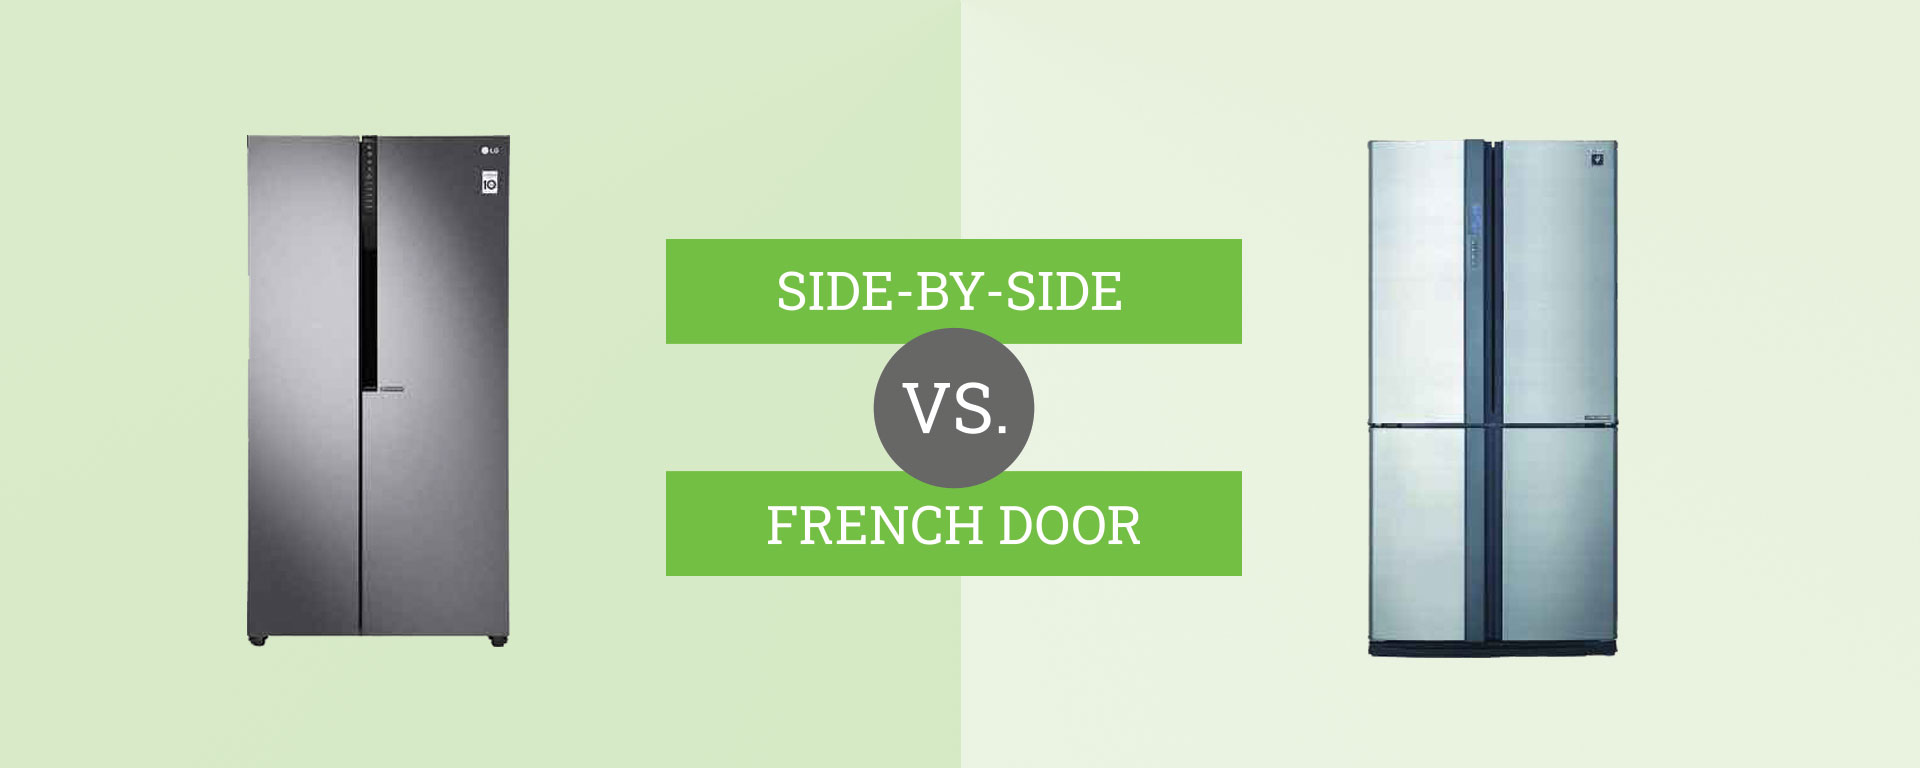 side by side vs. french door refrigerator